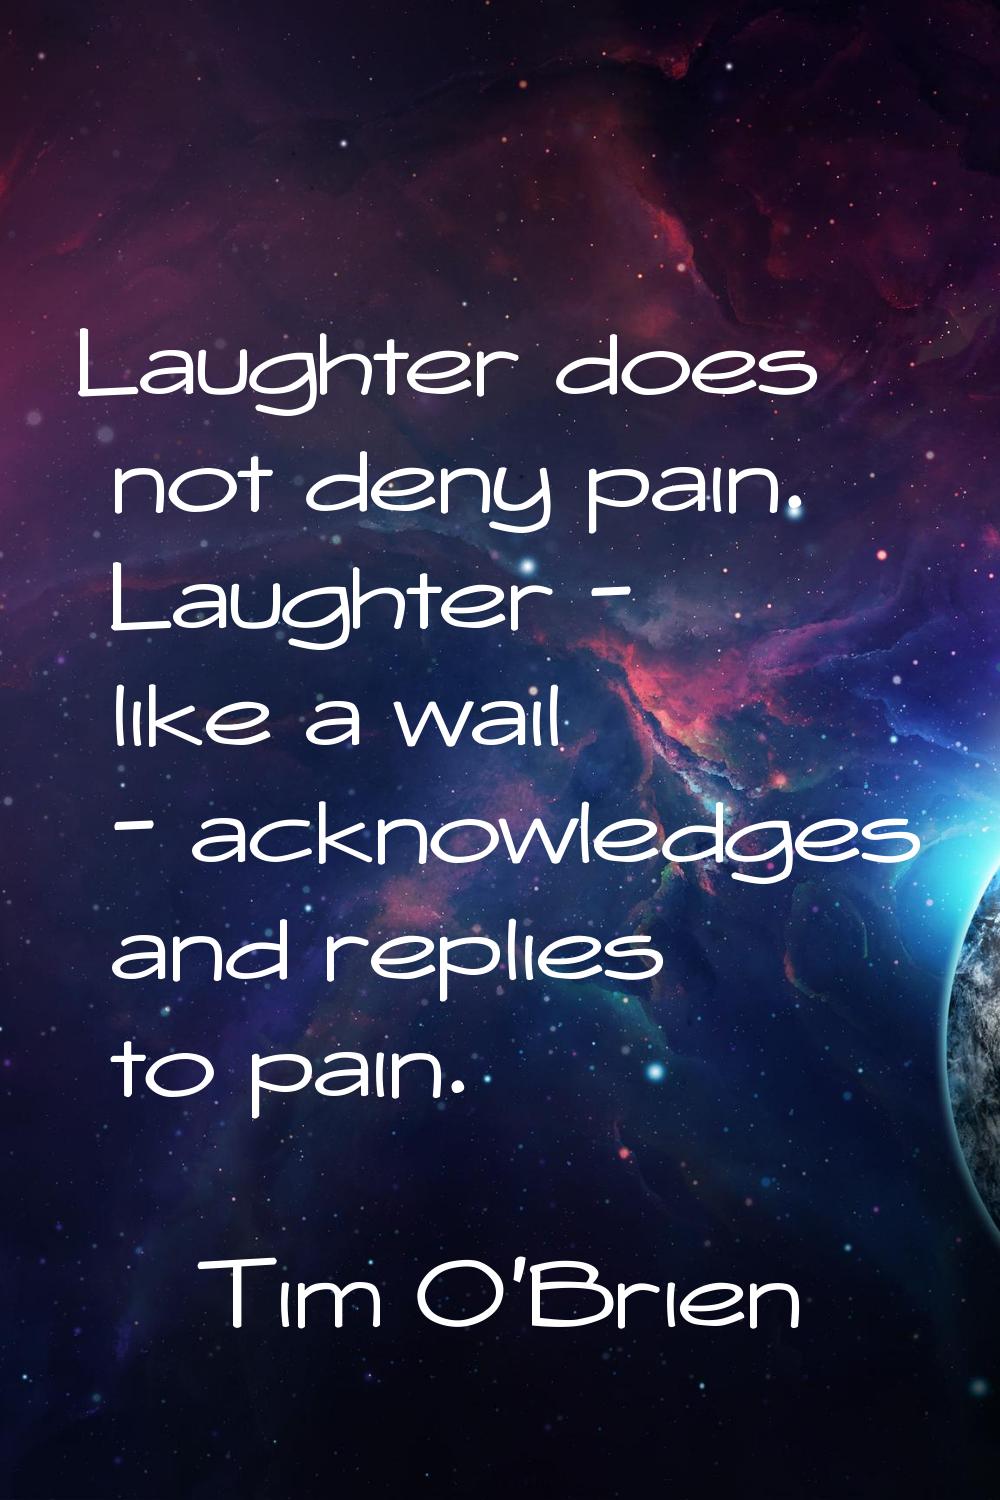 Laughter does not deny pain. Laughter - like a wail - acknowledges and replies to pain.